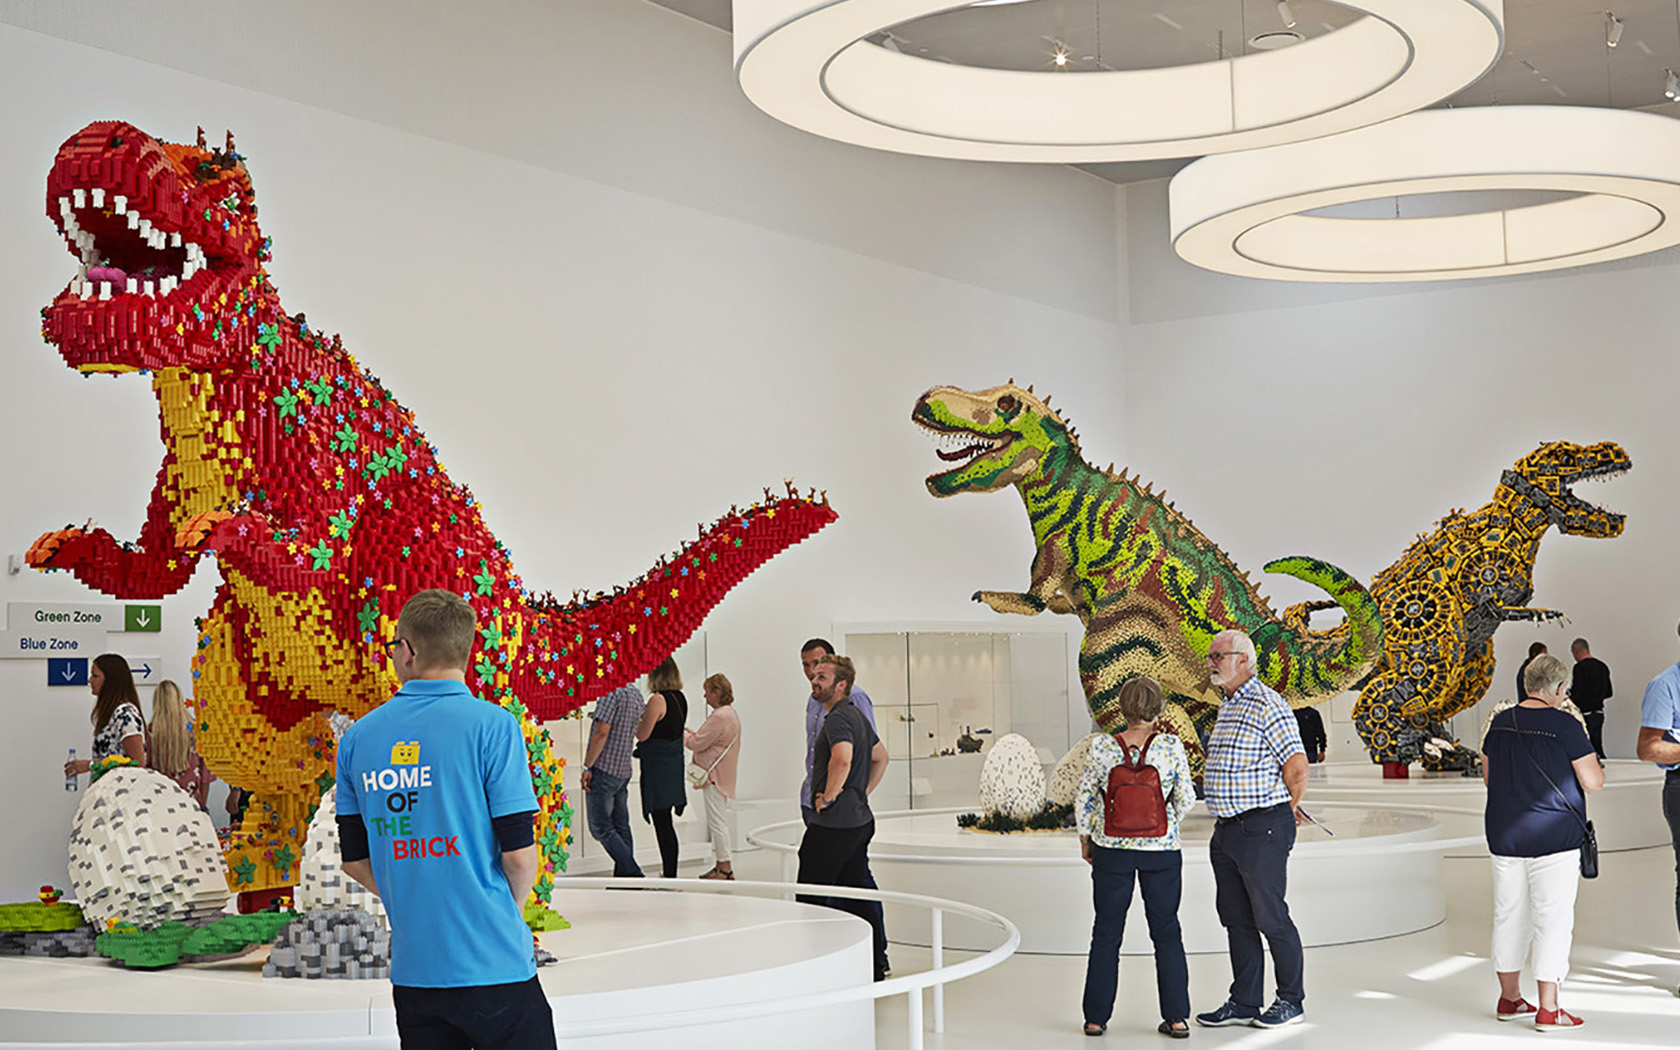 skrue undulate Fortryd Denmark's Real Life Lego House Has Opened To The Public